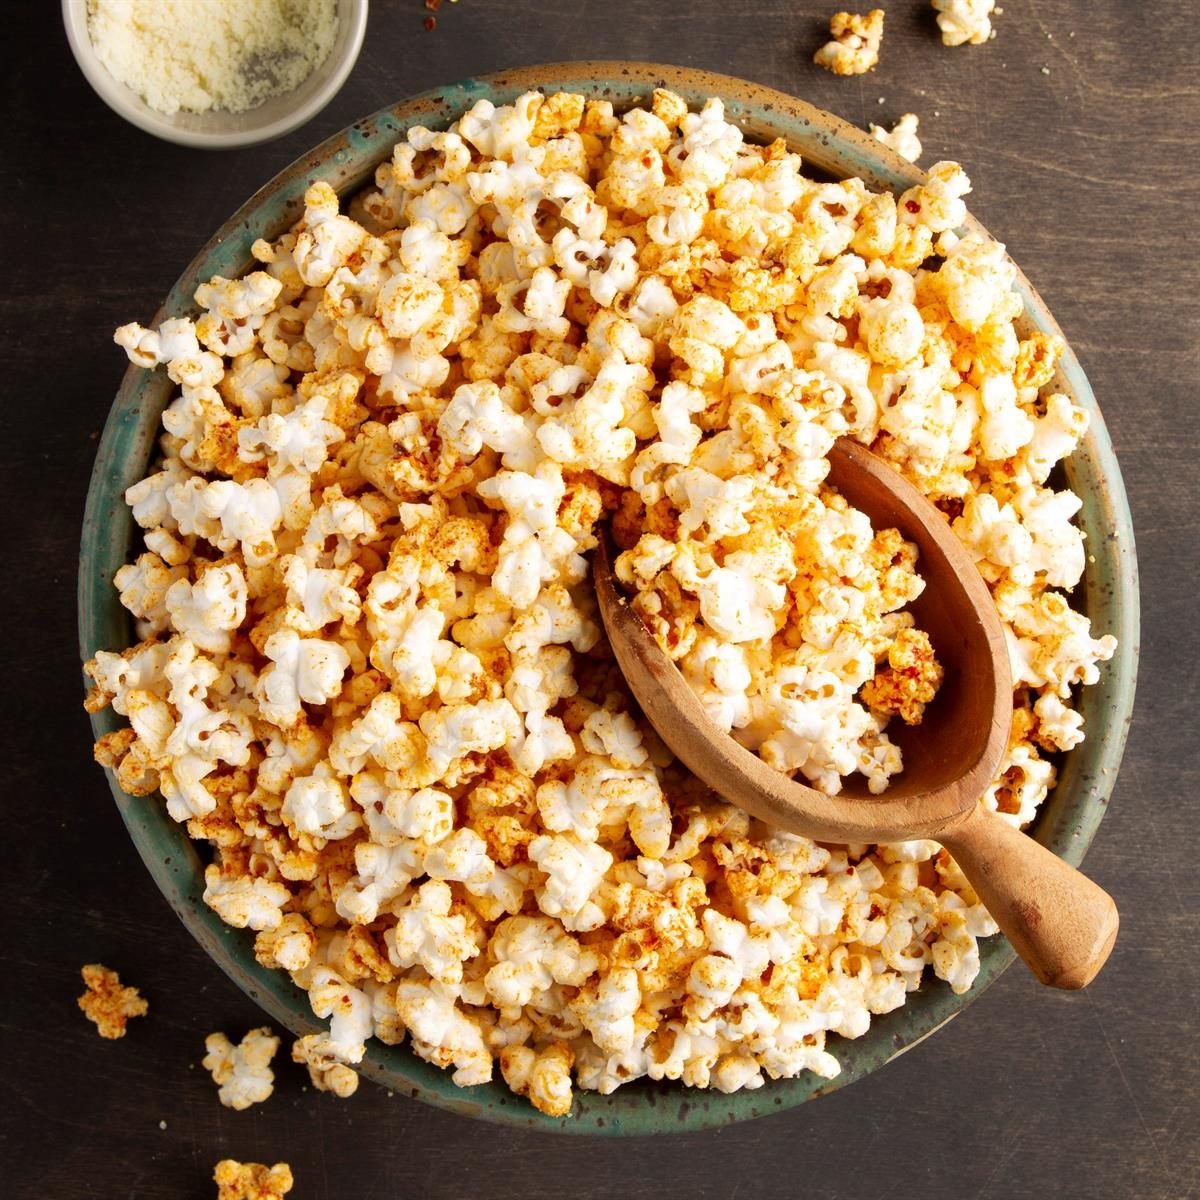 Spicy Popcorn Recipe: How to Make It